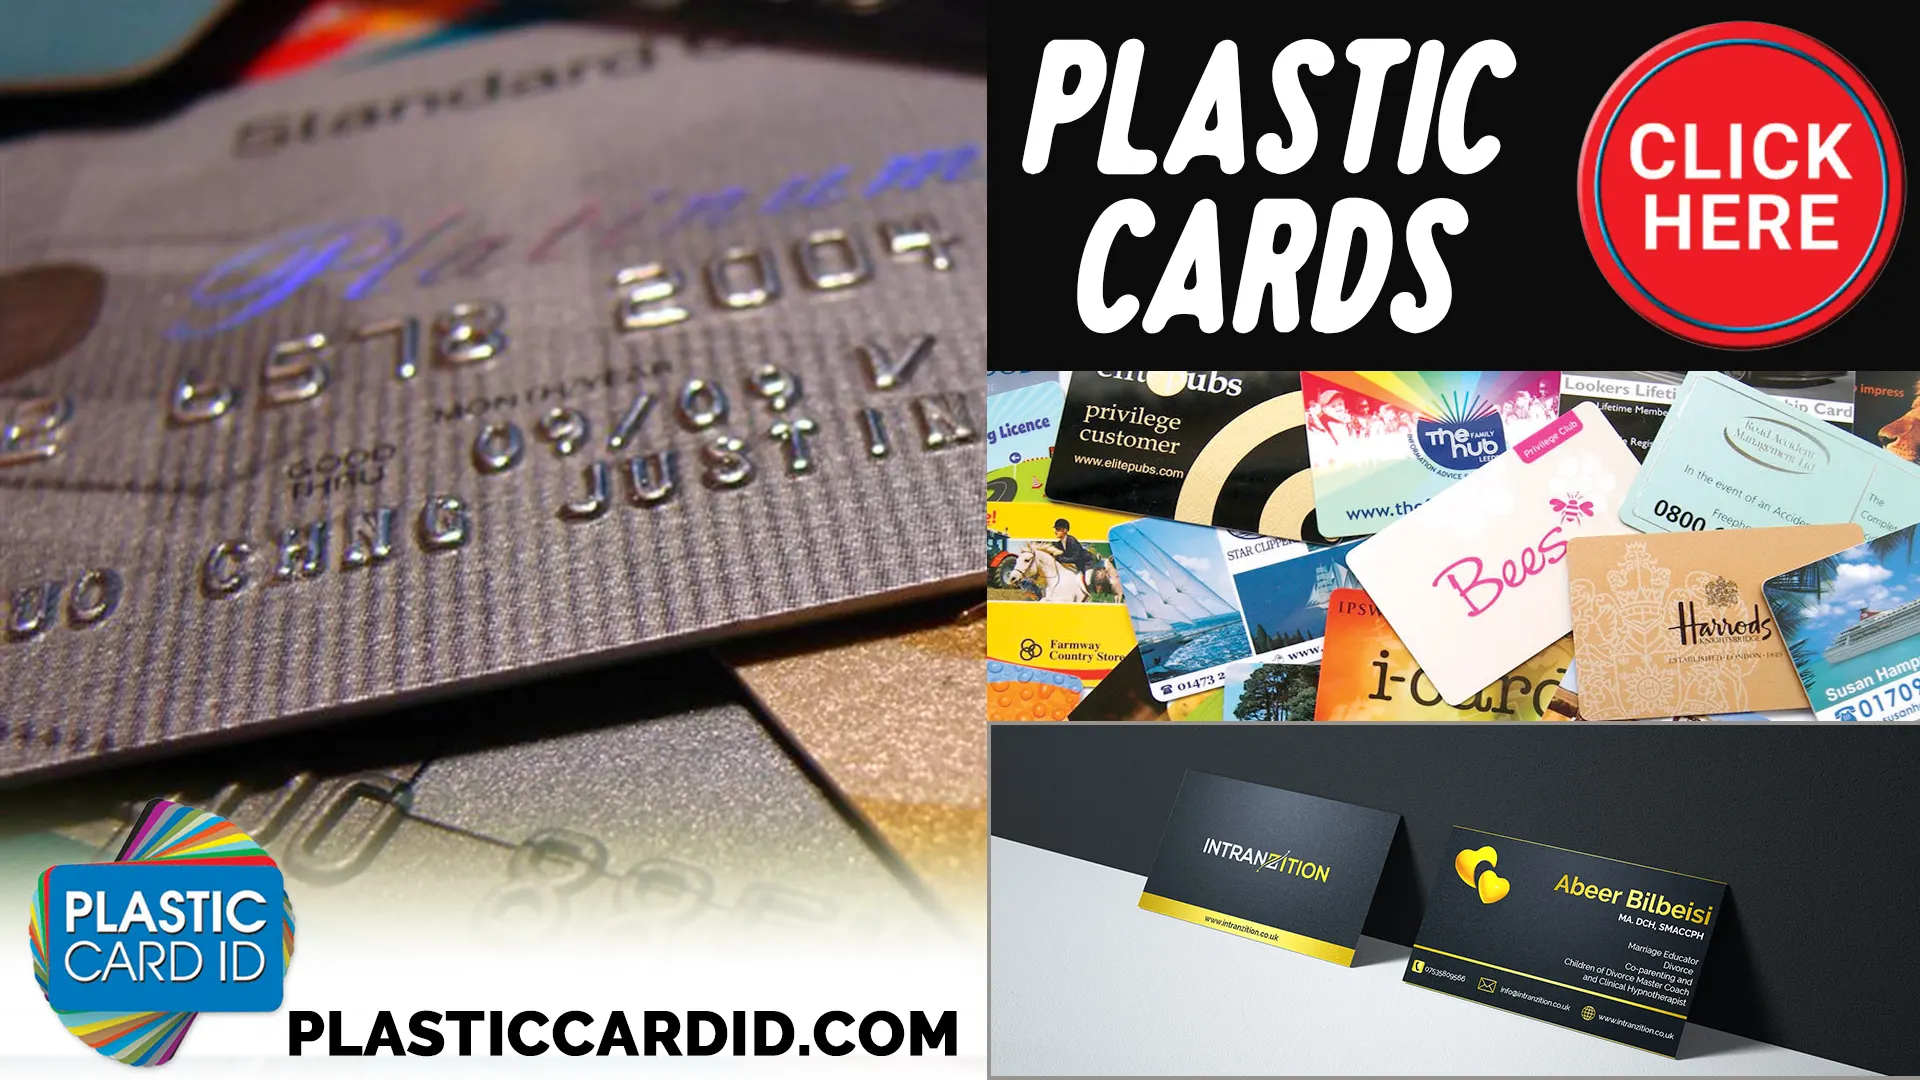 The Heart Behind Plastic Card ID
: Driven by Dedication and Innovation